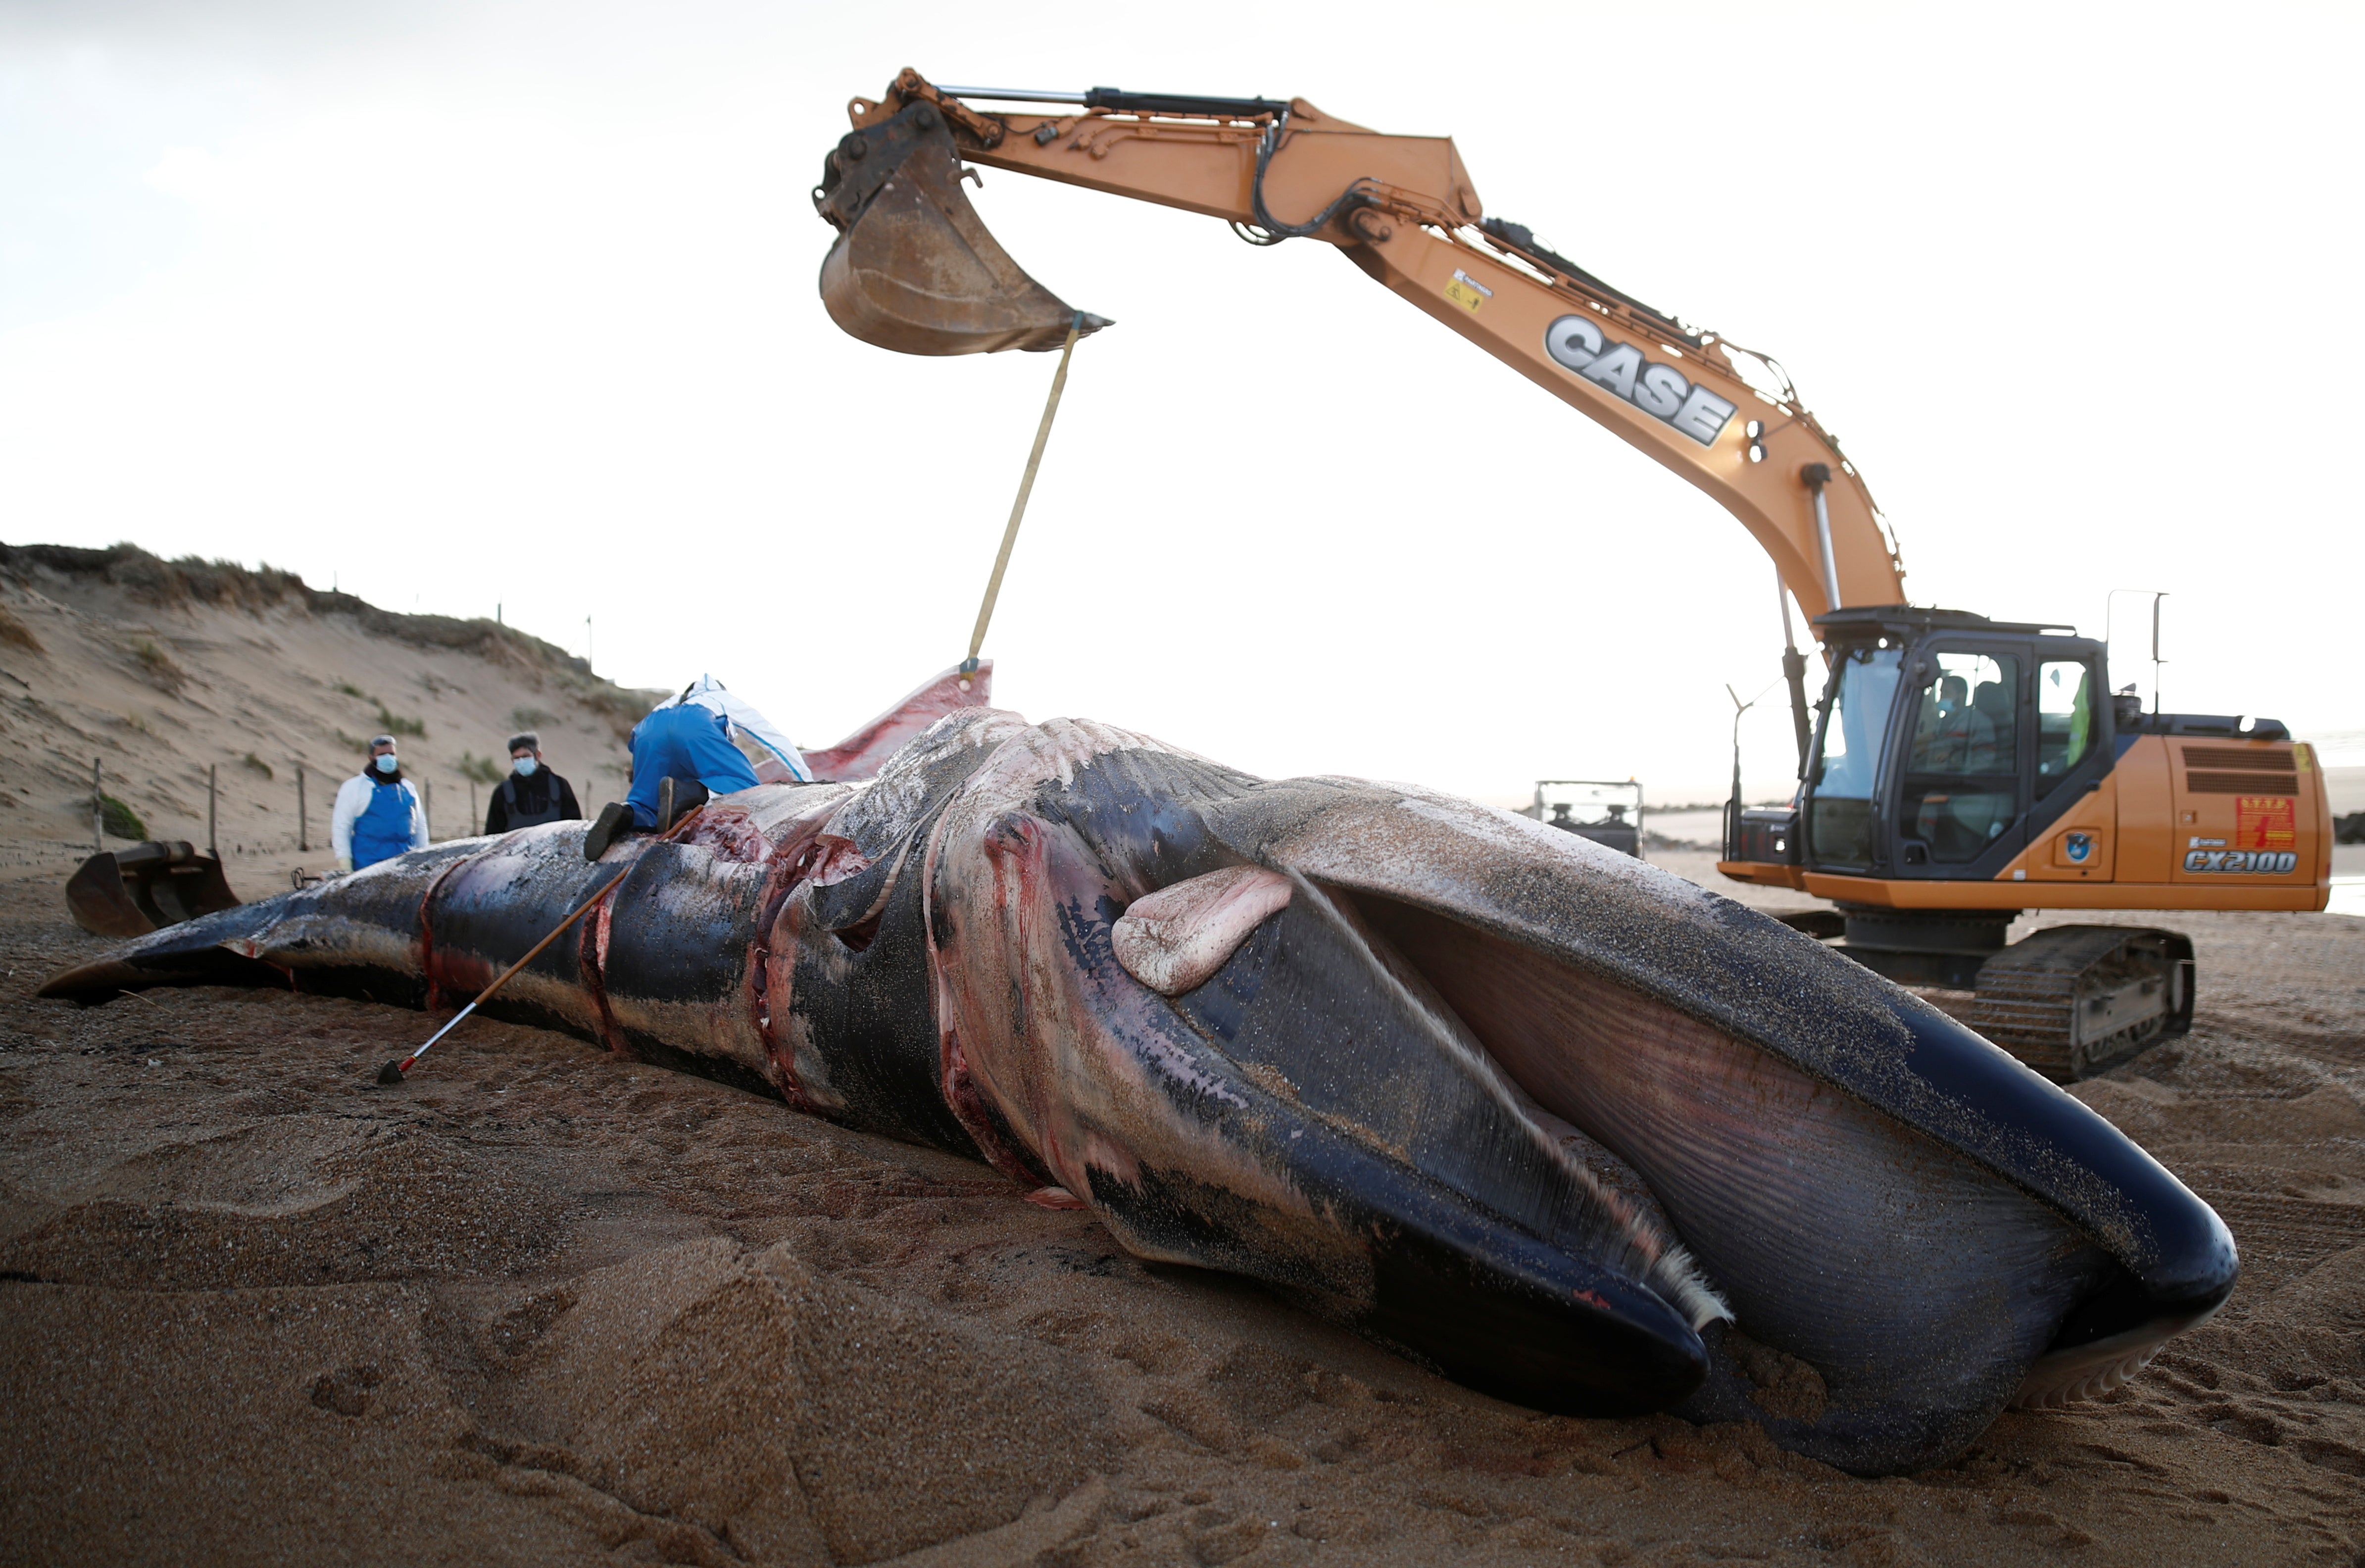 Experts at the Observatoire Pelagis examine the dead body of a fin whale which was found stranded on a beach in Saint-Hilaire-de-Riez